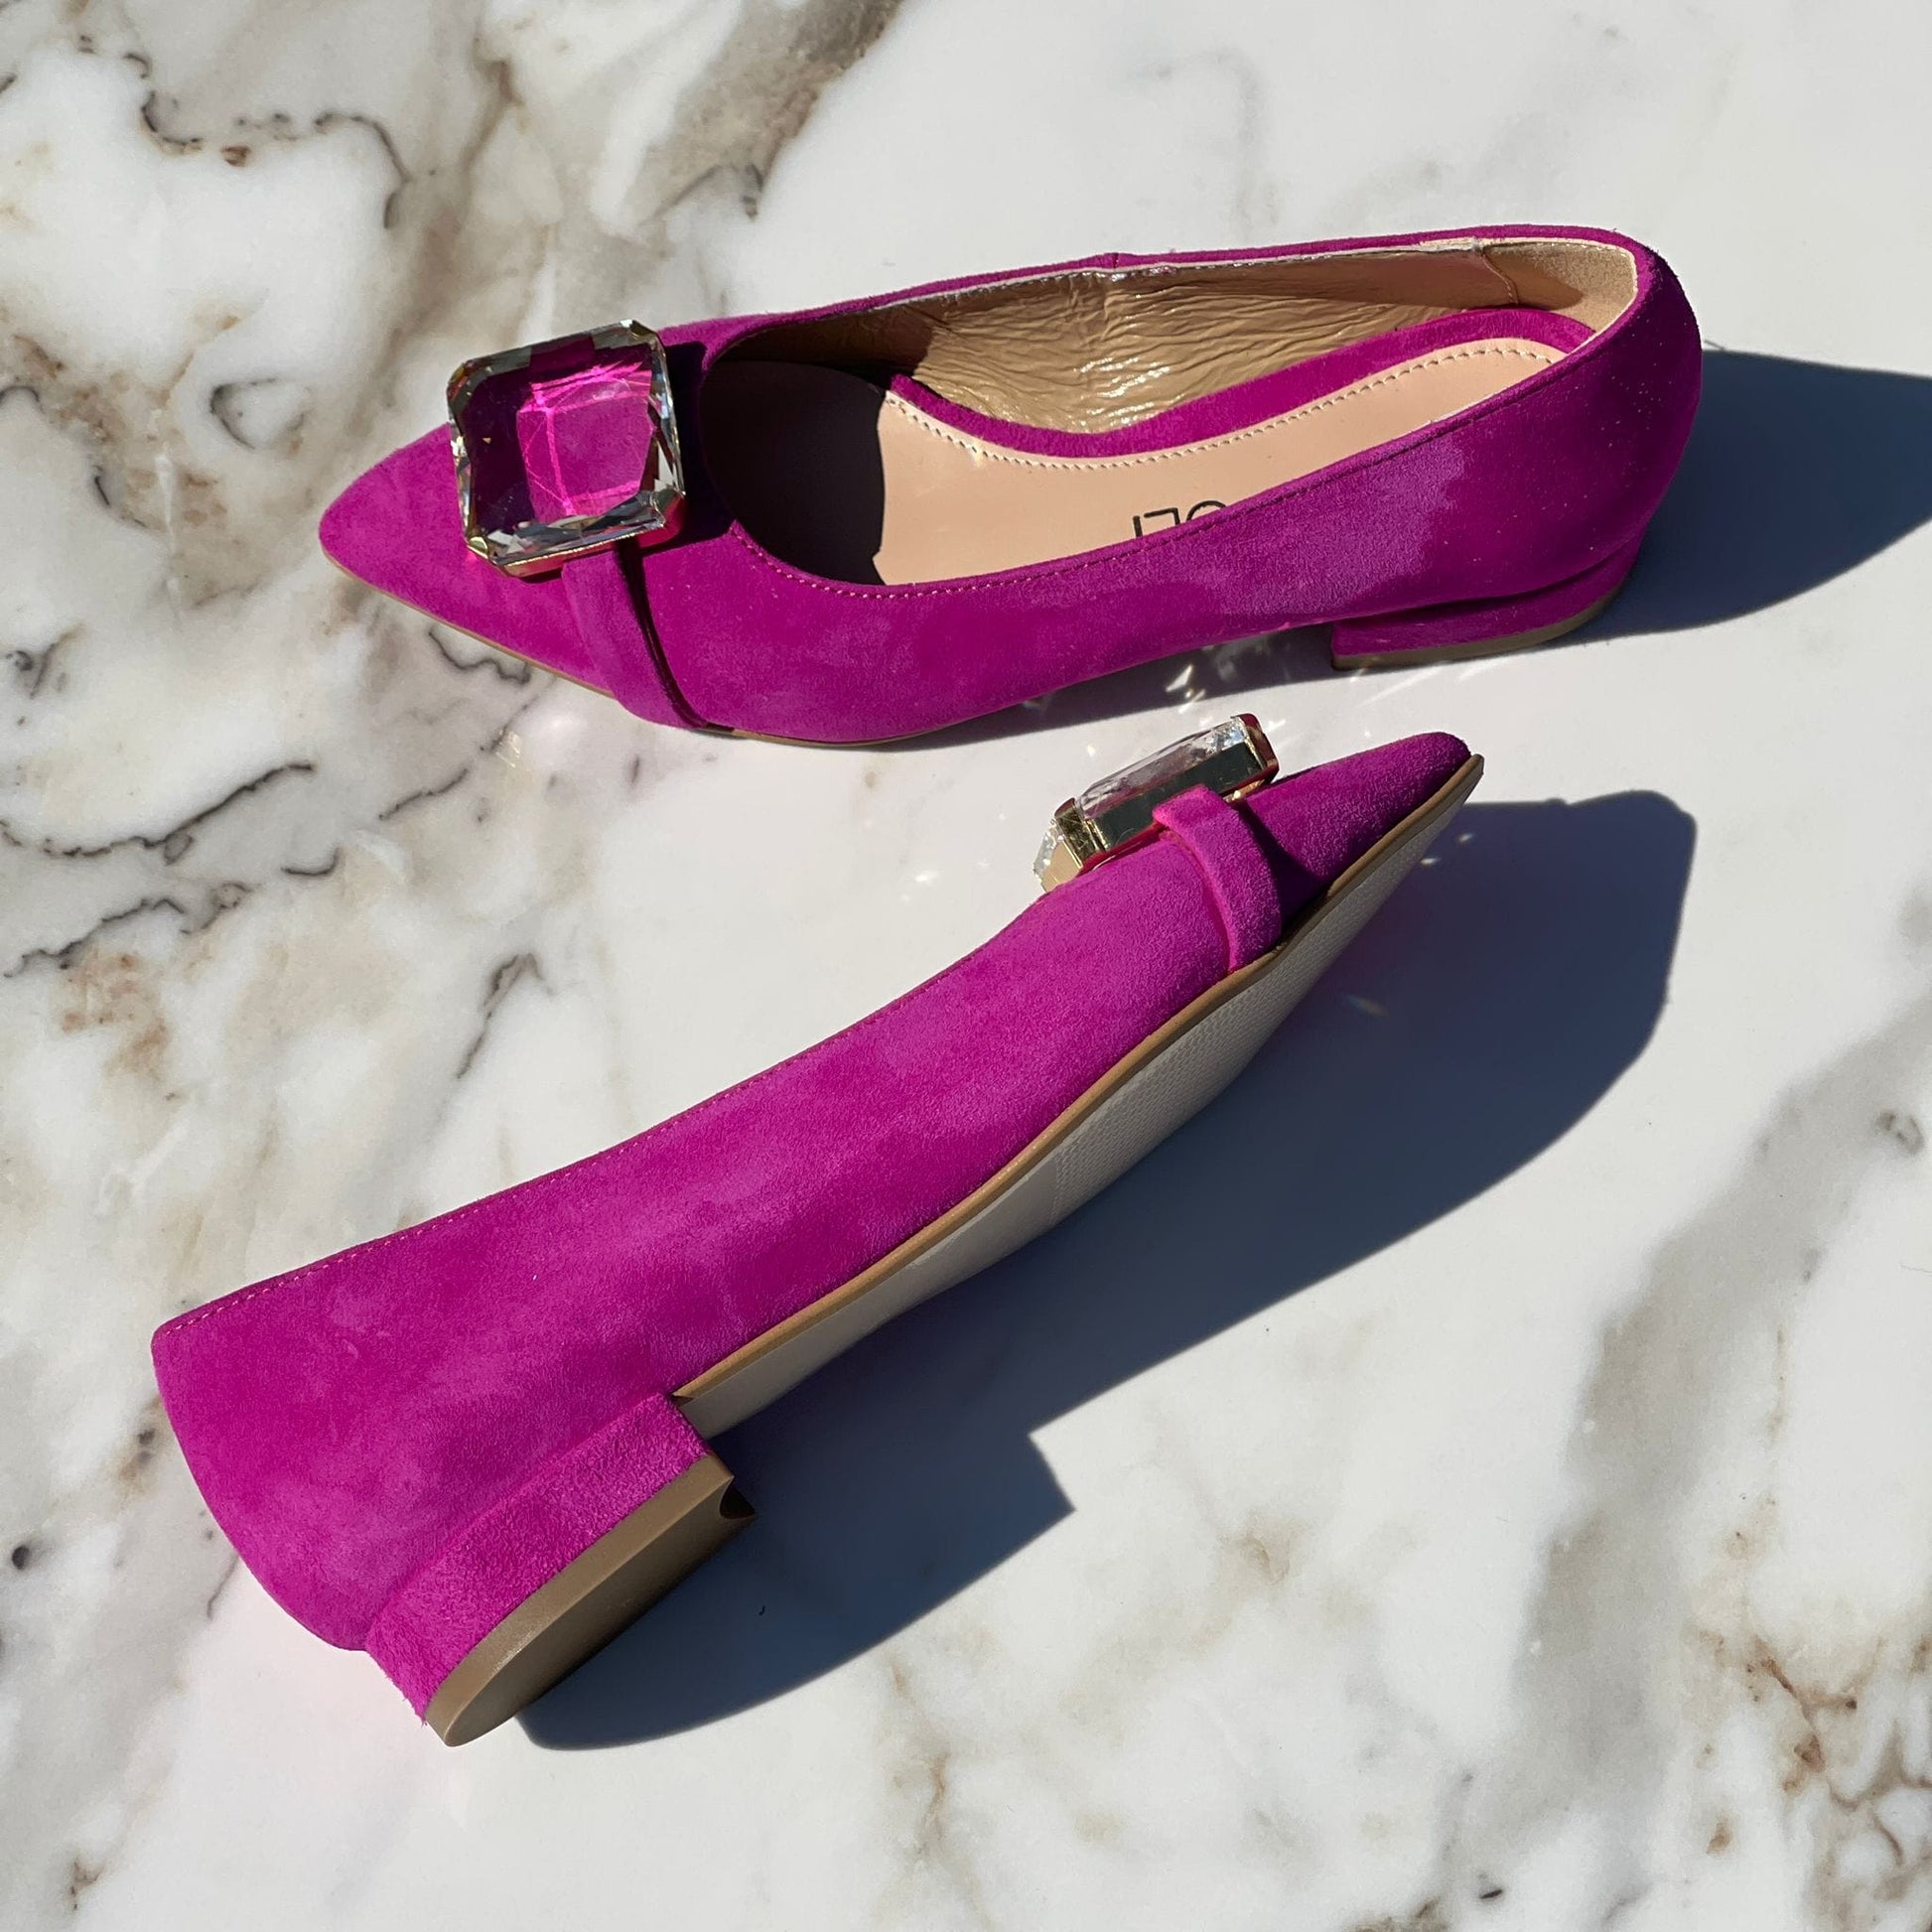 Petite balerina shoes in pink suede leather